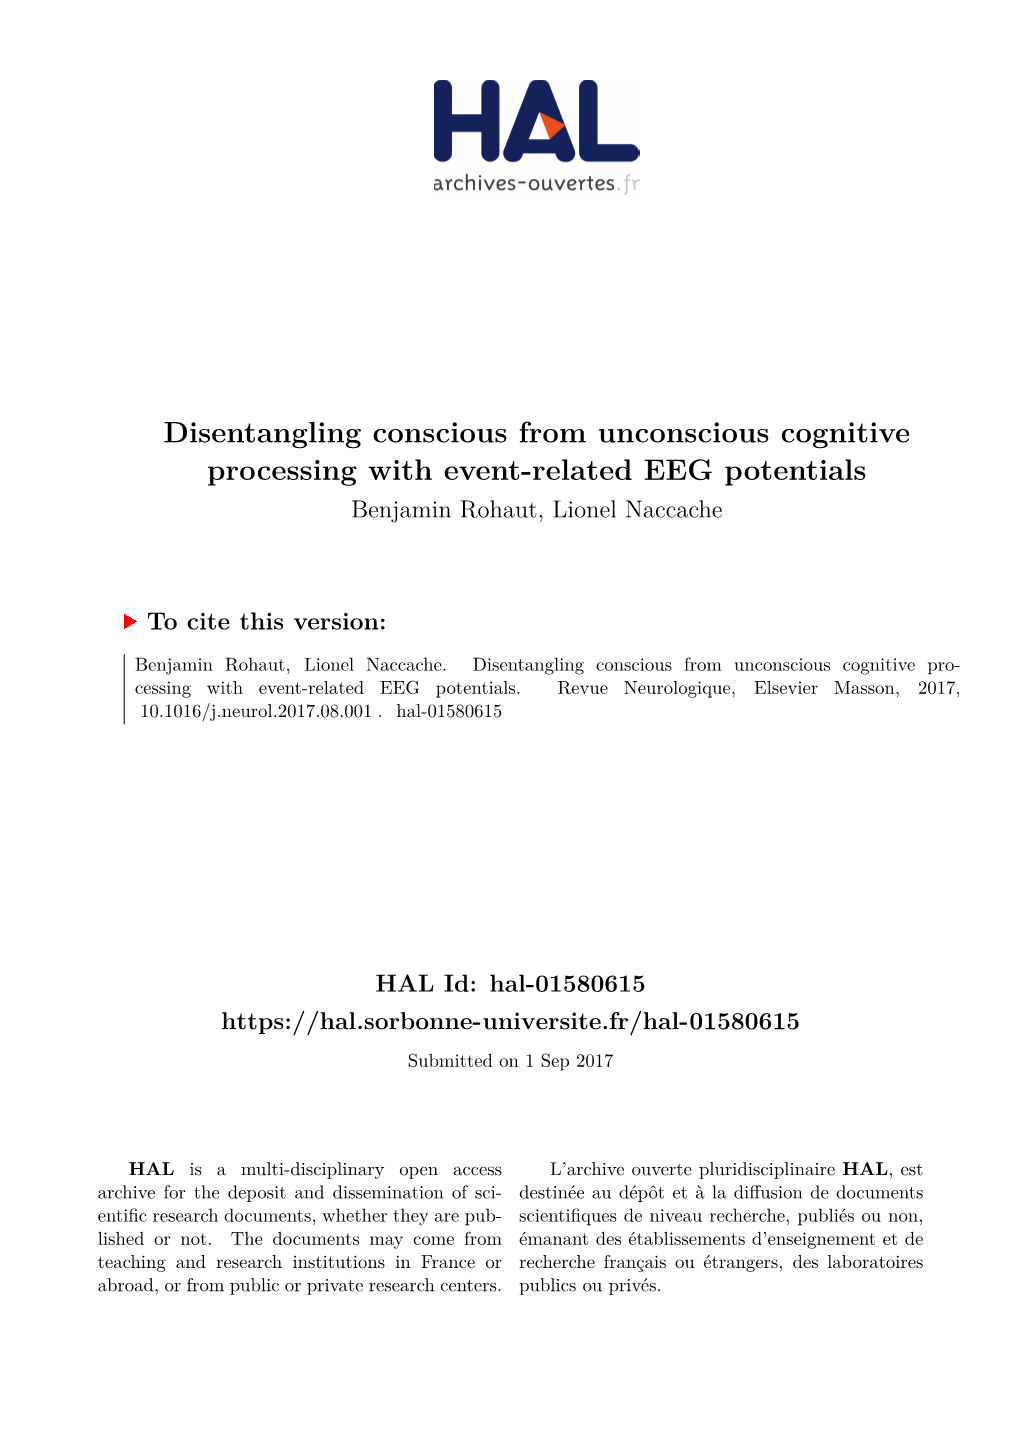 Disentangling Conscious from Unconscious Cognitive Processing with Event-Related EEG Potentials Benjamin Rohaut, Lionel Naccache